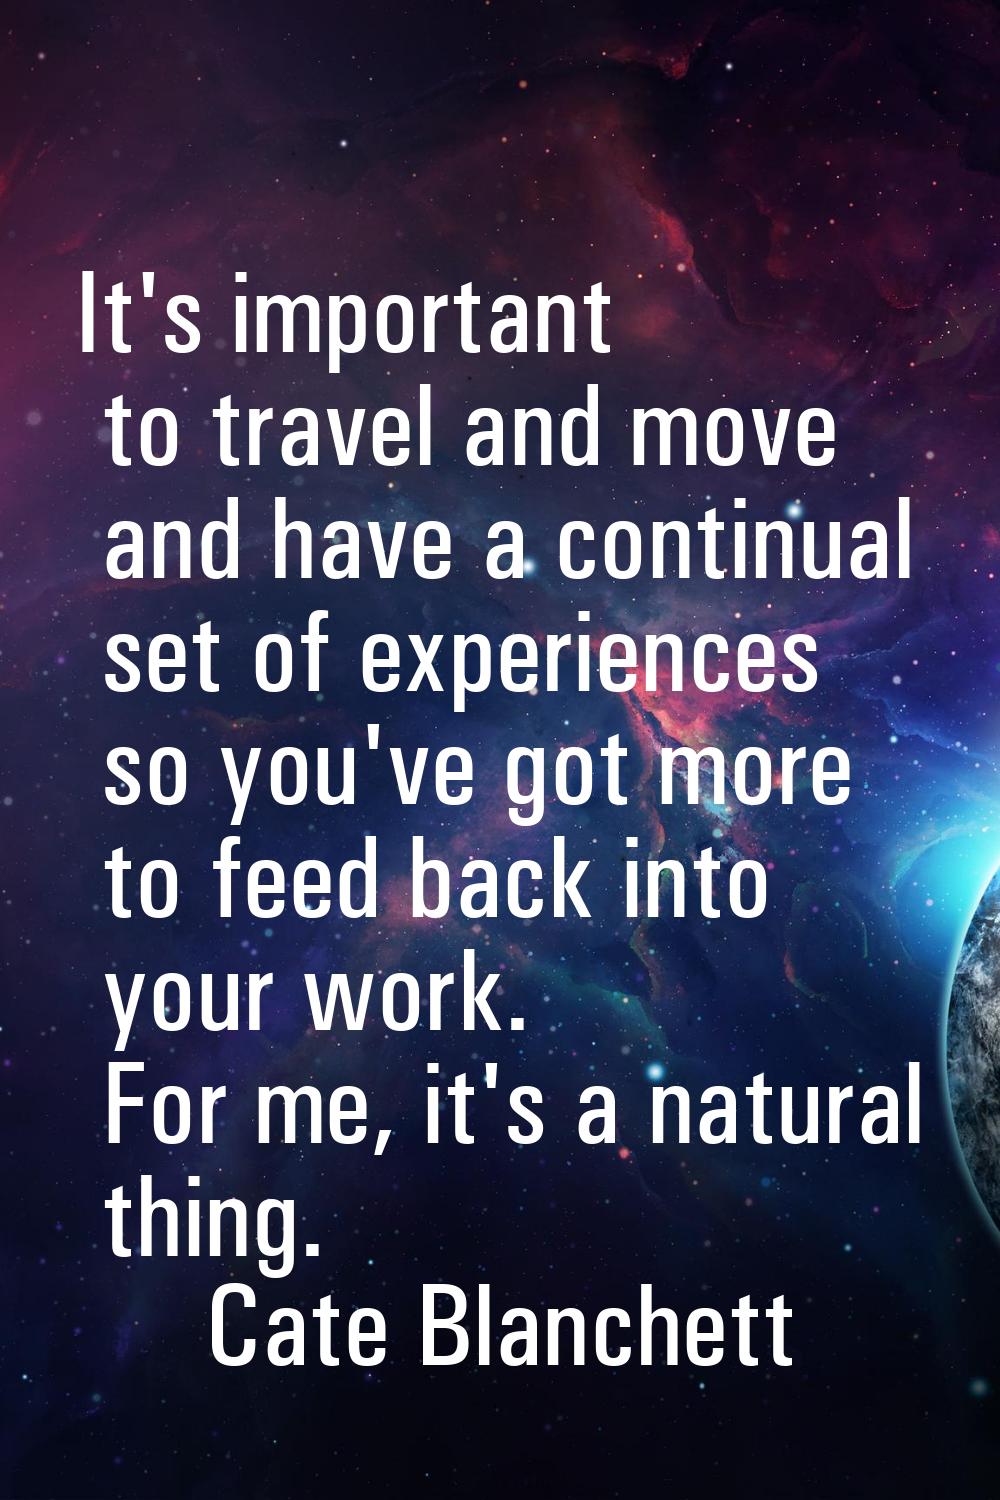 It's important to travel and move and have a continual set of experiences so you've got more to fee